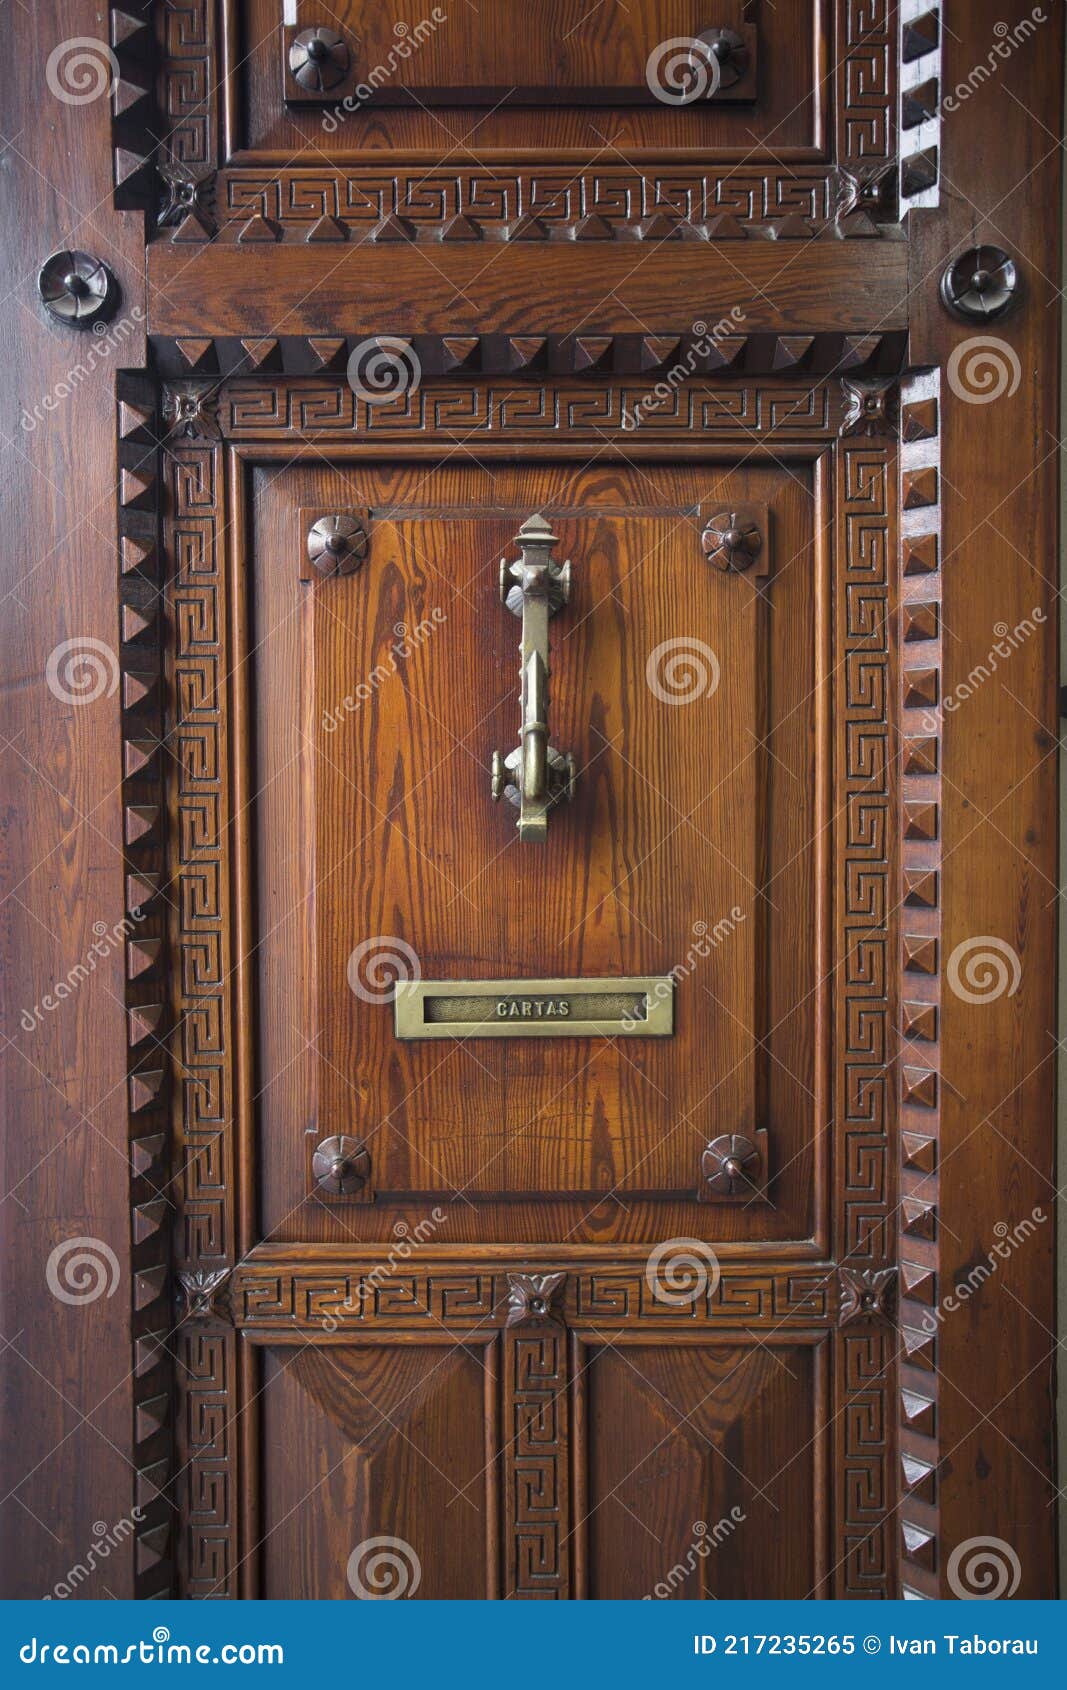 vintage oak door in spain with knock knob and mailbox labeled cartas